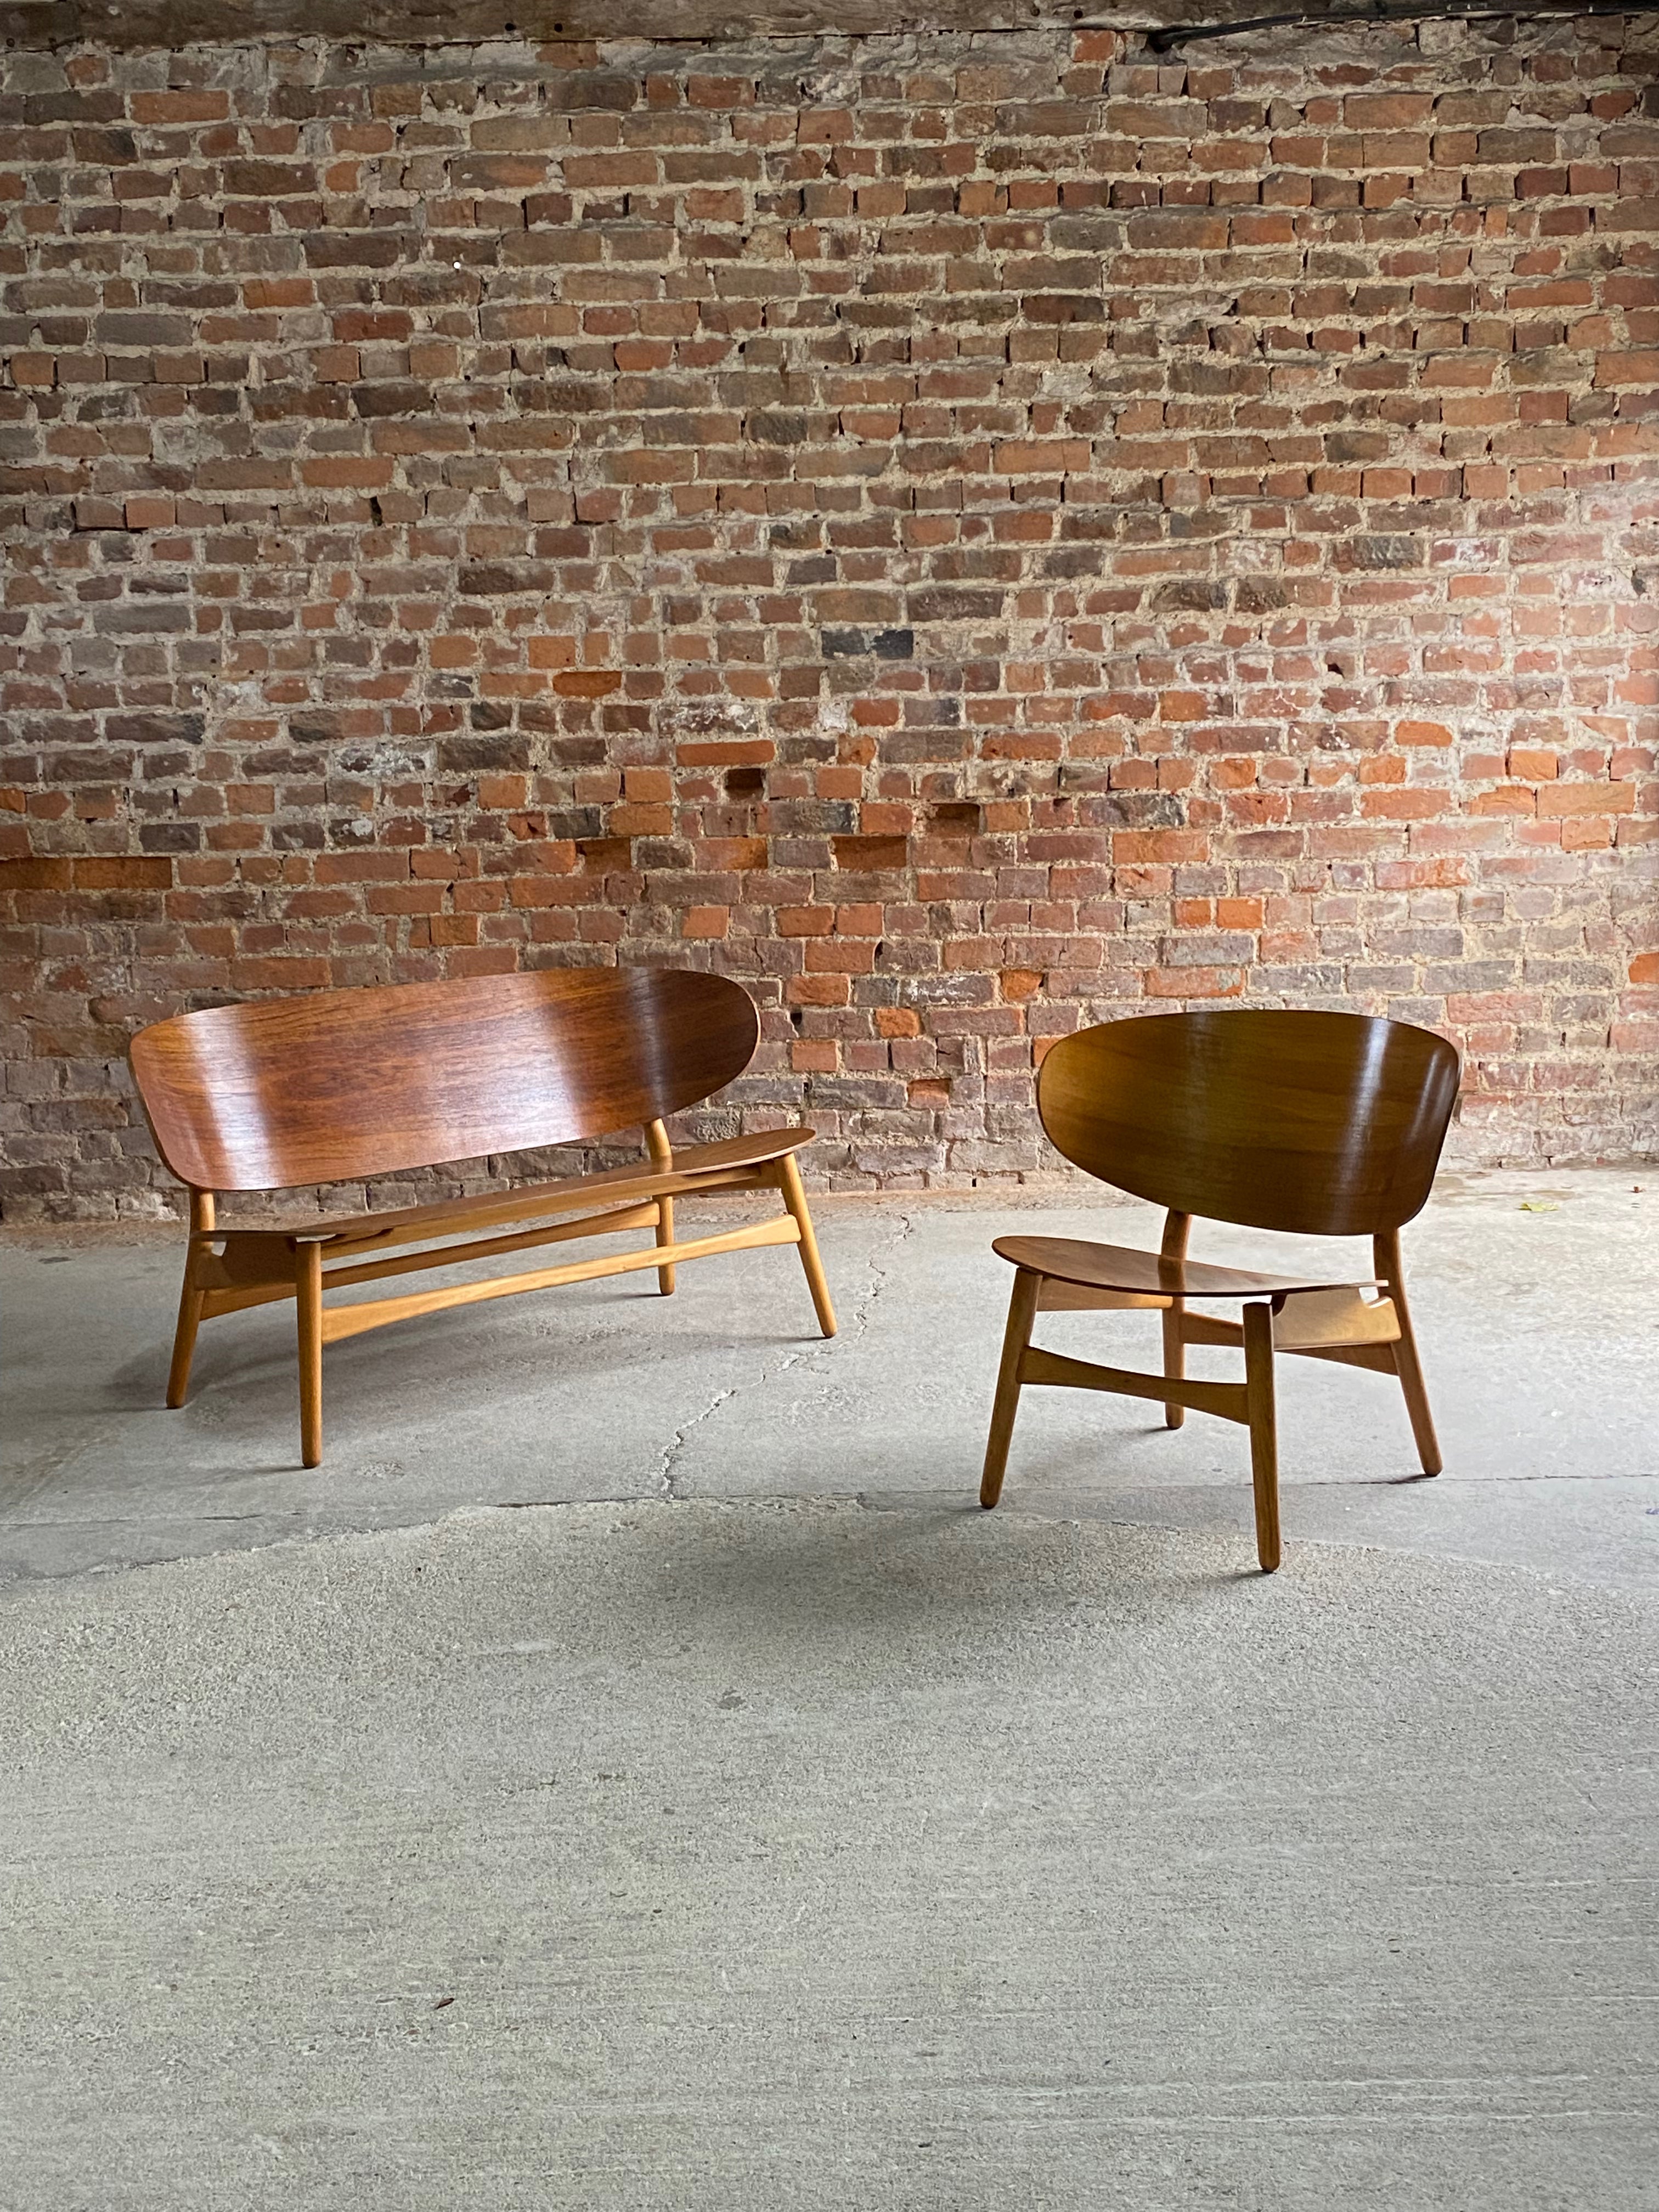 Hans  Wegner Shell Settee Model 1935 & Shell Chair Model 1936 by Fritz Hansen 1950

Hans J Wegner Shell Settee Model 1935 by Fritz Hansen Denmark circa 1950, this extremely rare and coveted collectors piece features a laminated teak shell back and